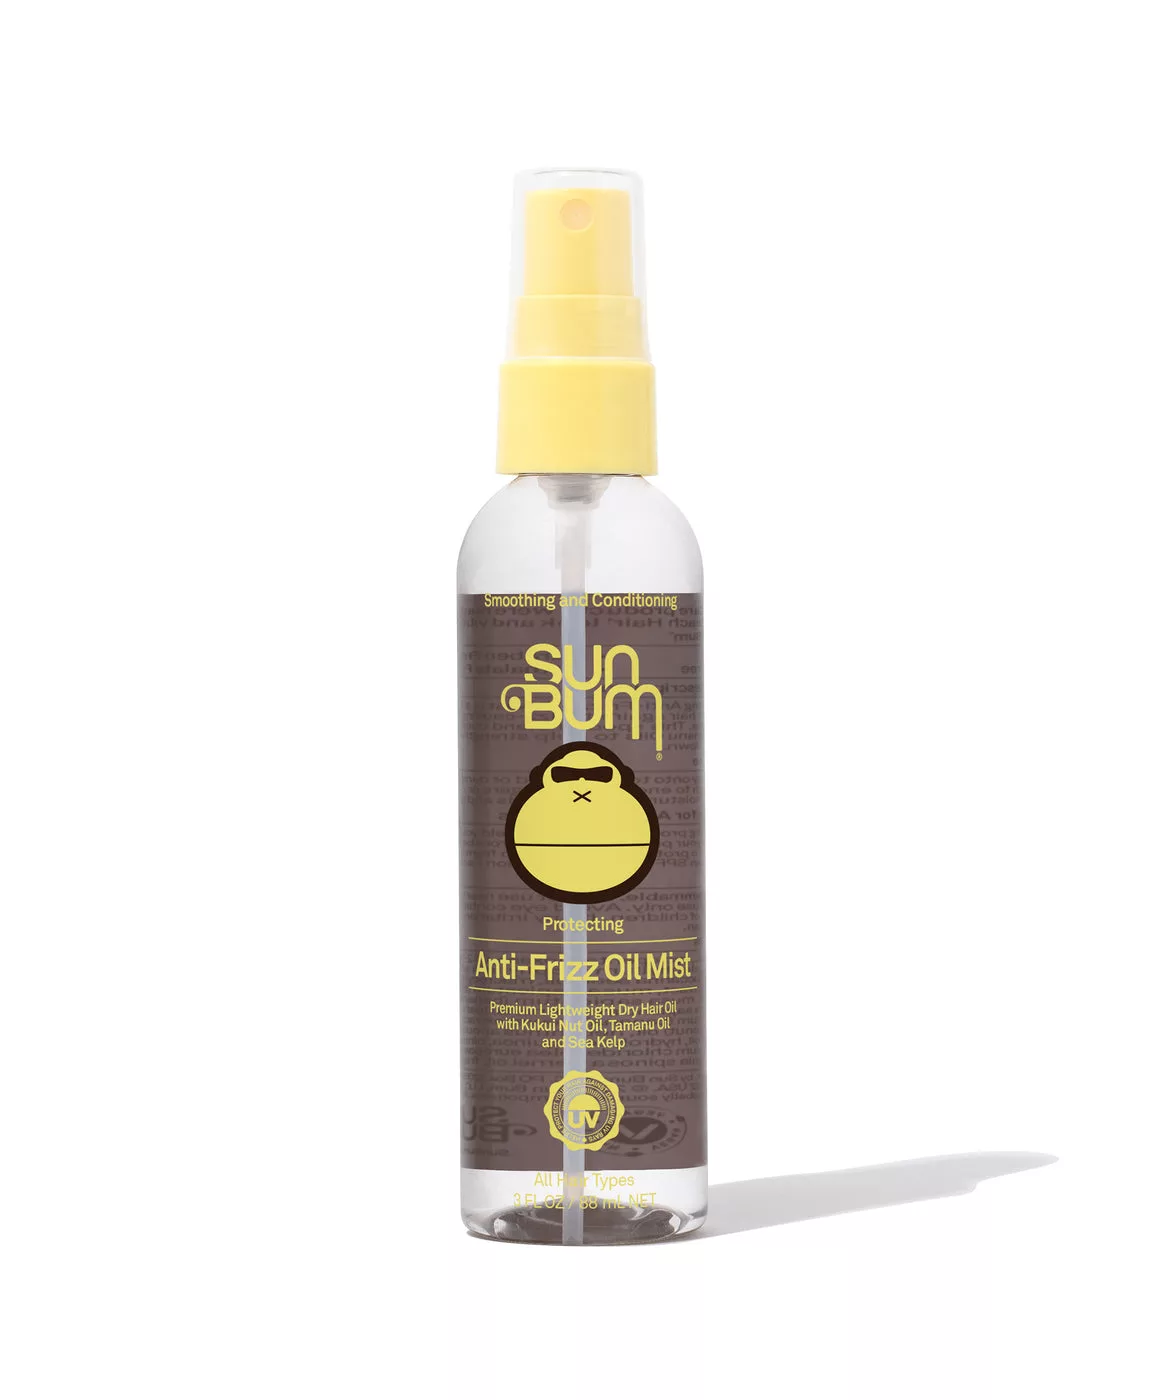 1_SB_USA_HAIR_Protecting_AntiFrizzOil_3oz_Front_2000x2400_PDP_444102_1400x1400